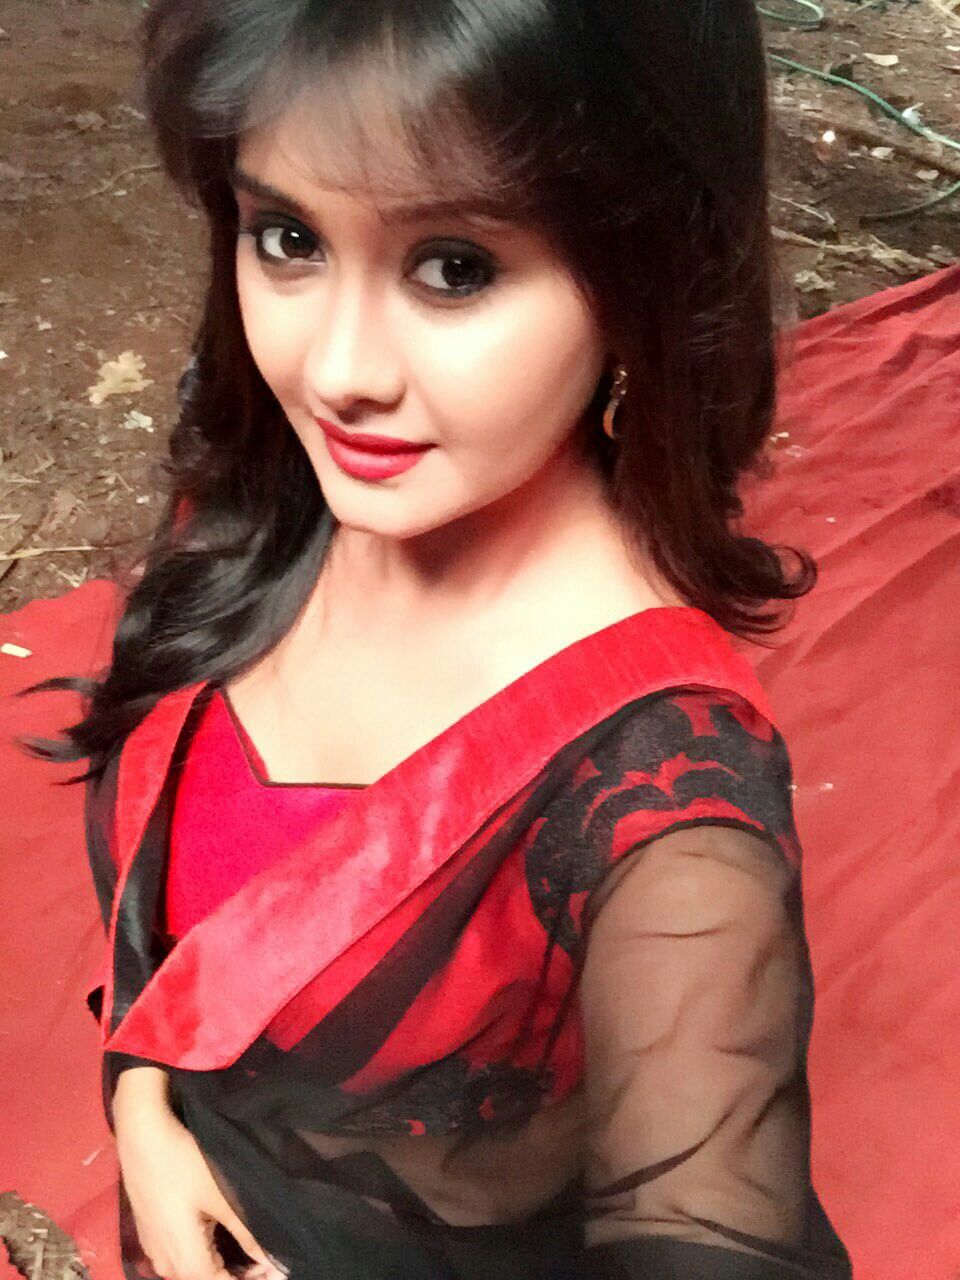 I will enact scenes which the society permits: Kanchi Singh